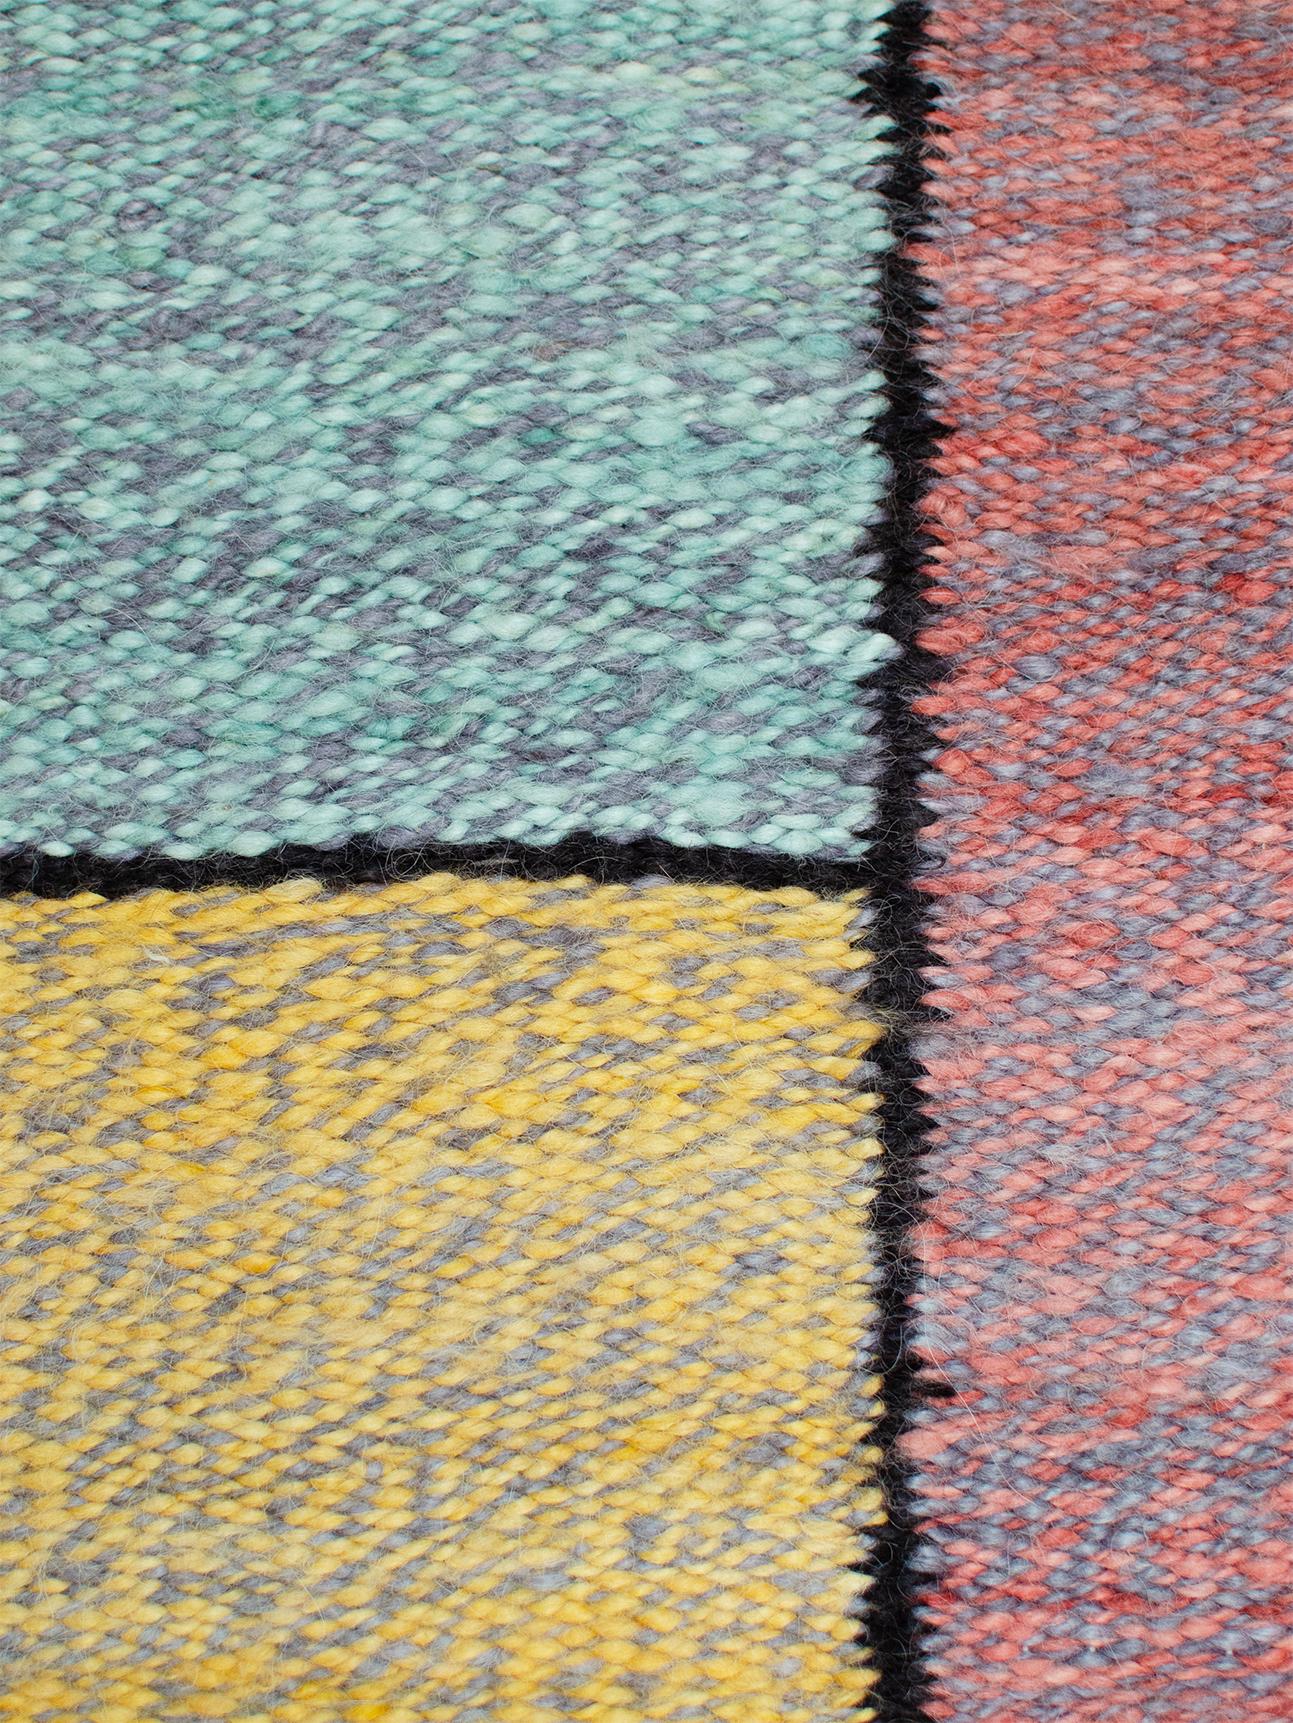 Adapted from the original artwork by Alejandro Puente, Shikra, 1995.

Limited edition of 15 handmade and unique rugs. 

LALANA RUGS is an applied arts initiative born from the desire to combine proposals by contemporary artists with traditional